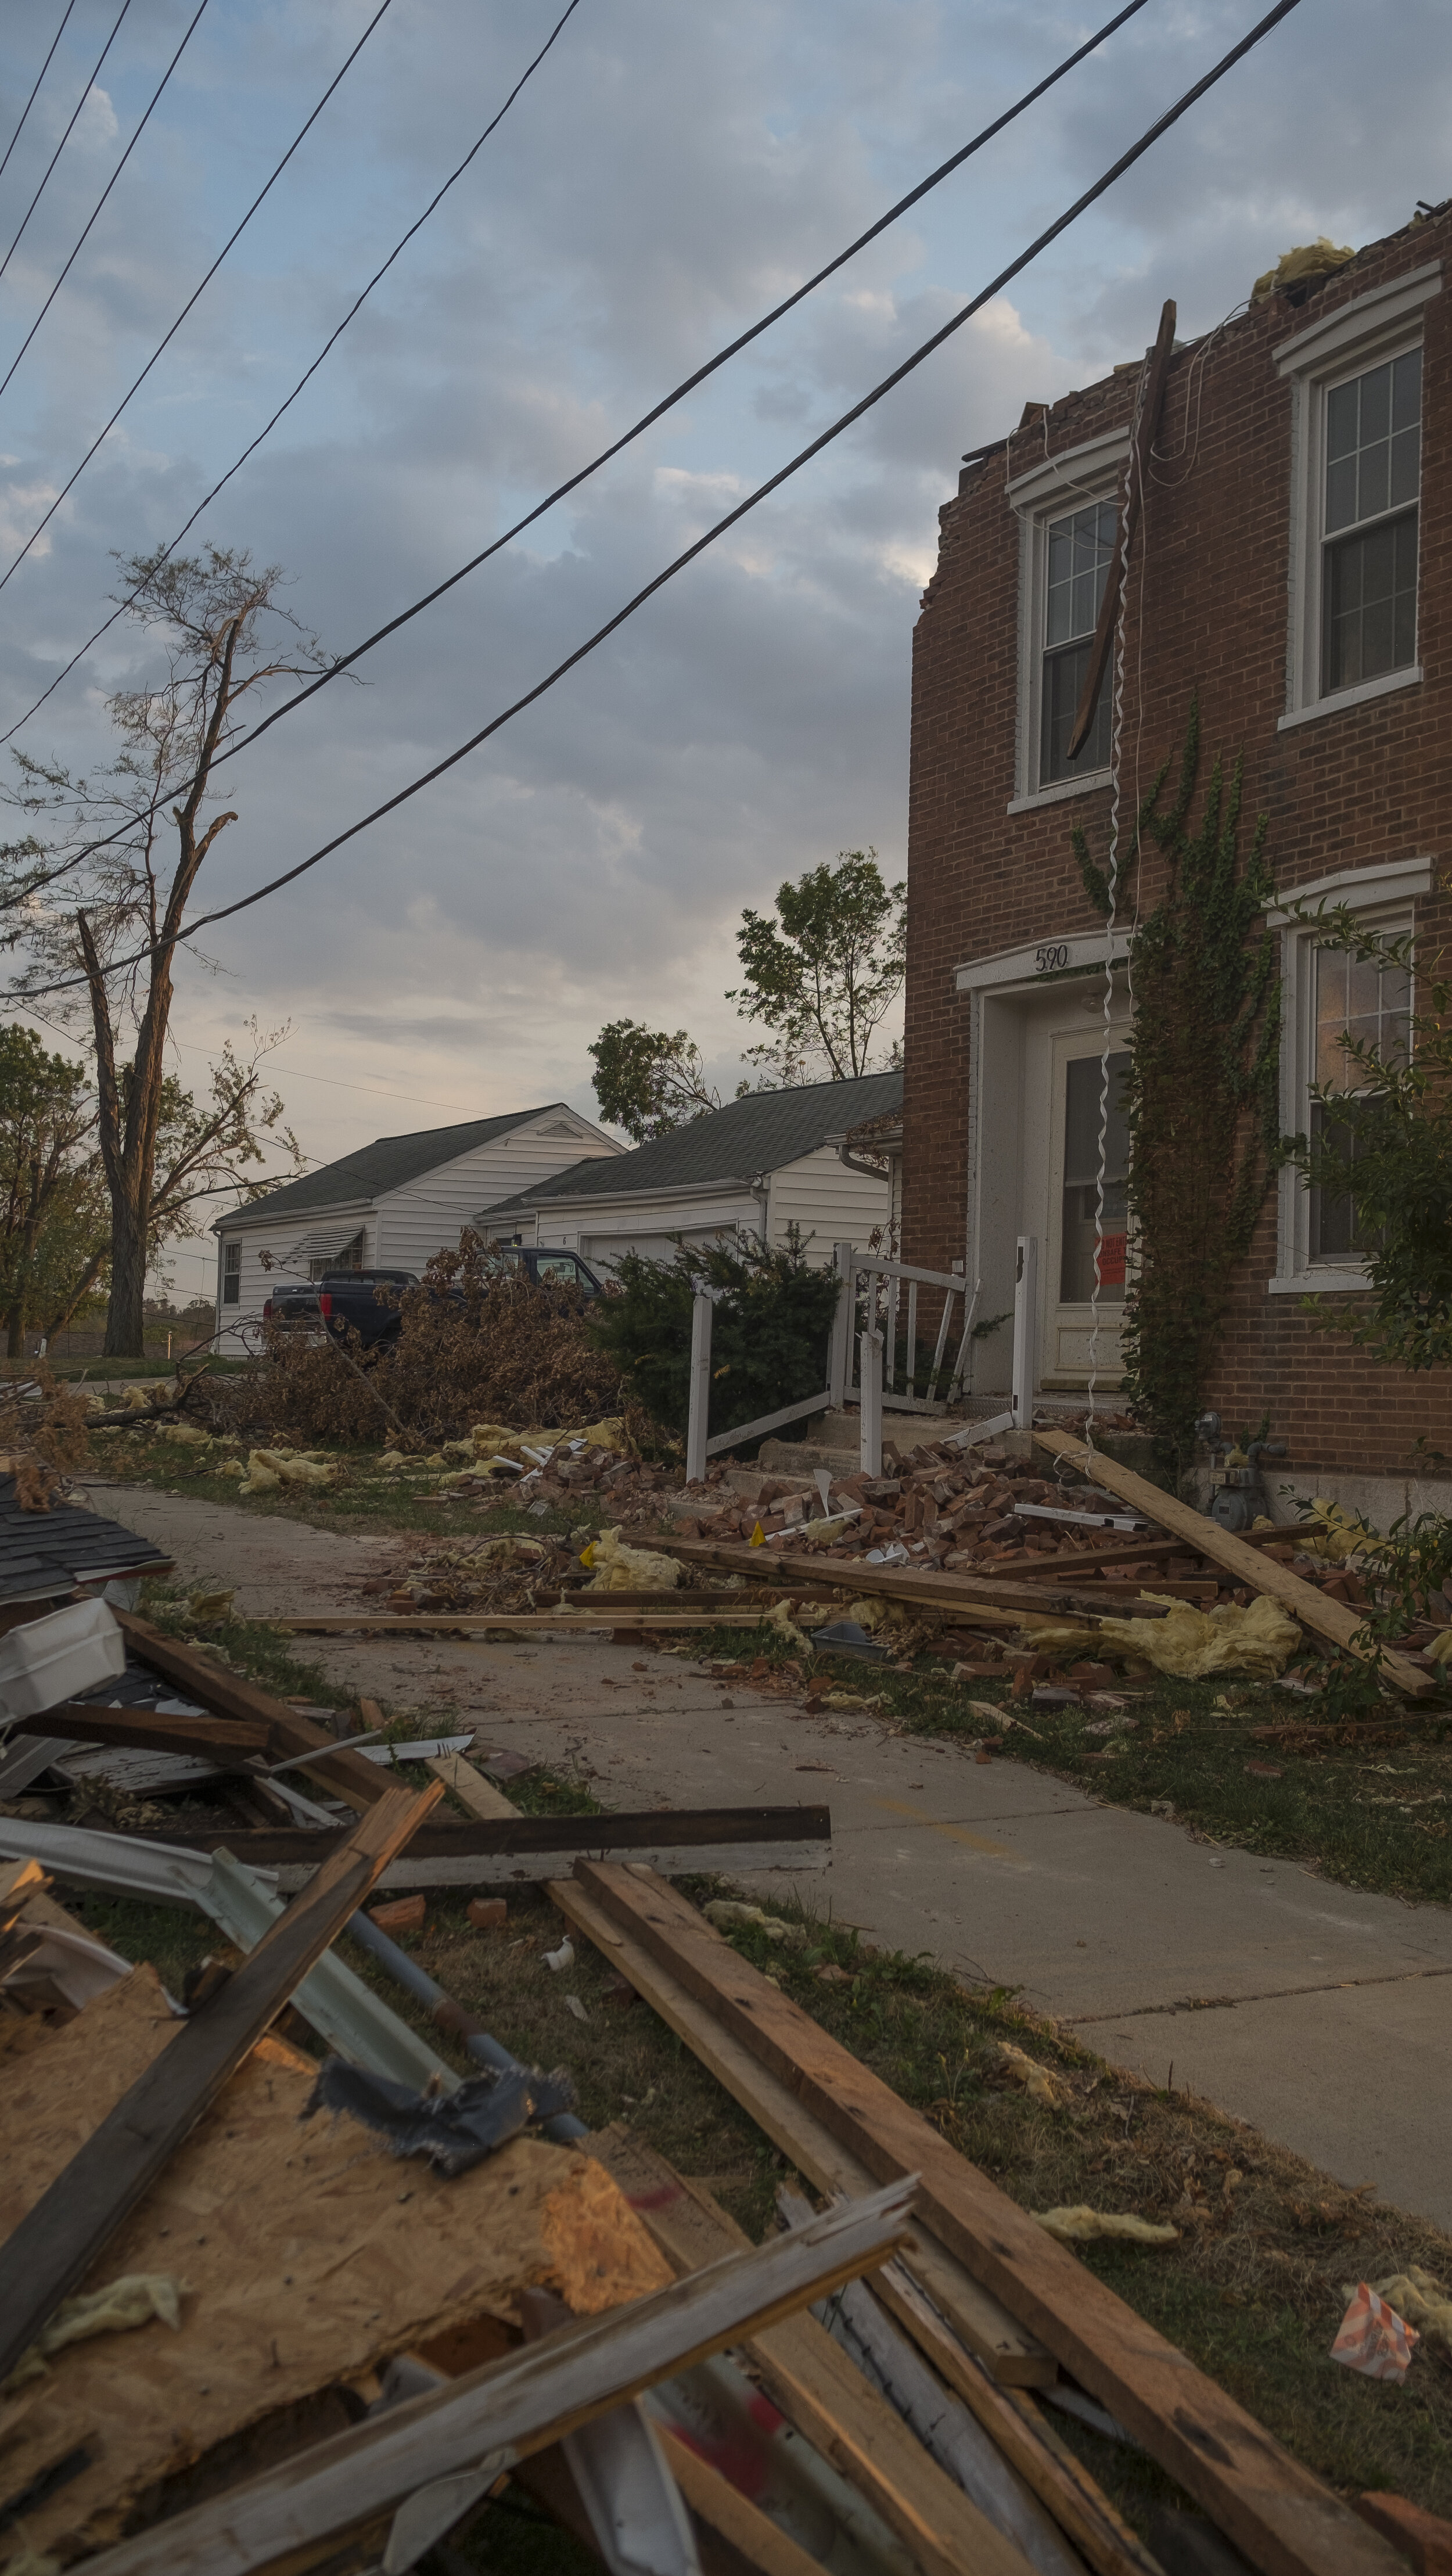  An older home on 11th Street in Marion, Iowa remains unsafe to enter on Friday, August 28th, 2020. 8,000 homes were destroyed or severely damaged with a $23.6 million cost to public infrastructure, according to the Iowa governor’s office. 